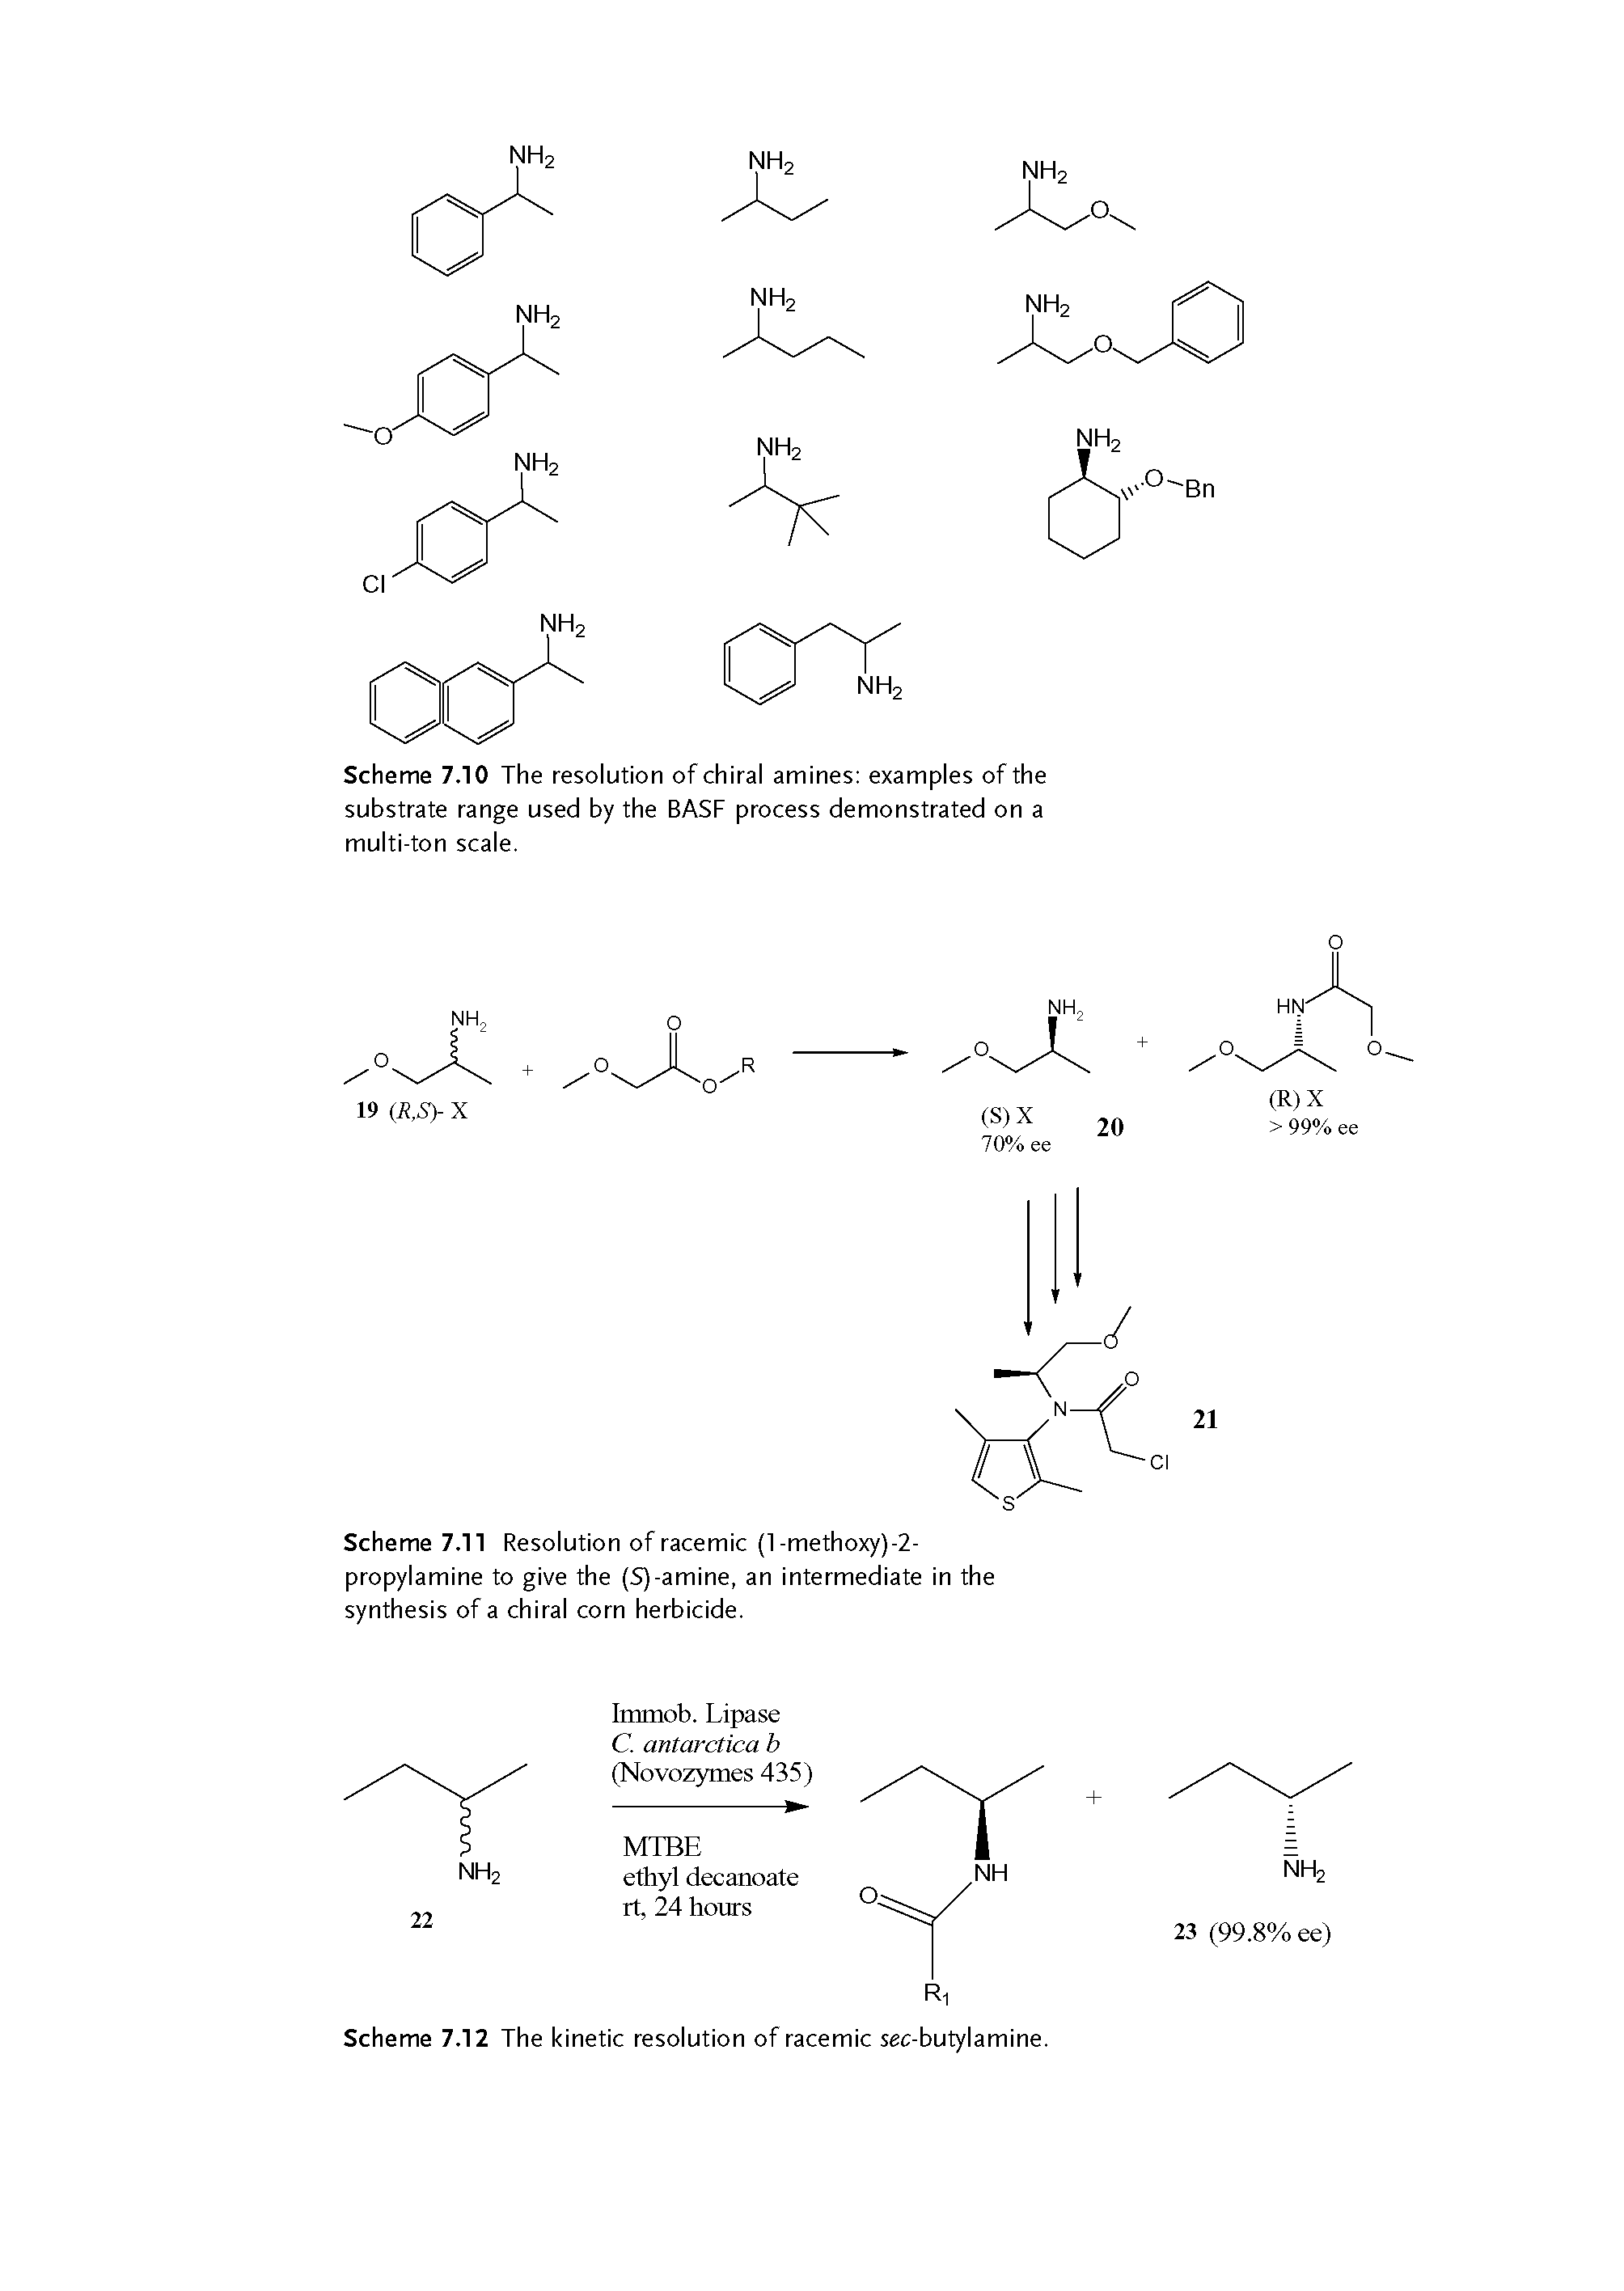 Scheme 7. Resolution of racemic (1-methoxy)-2-propylamine to give the (S)-amine, an intermediate in the synthesis of a chiral corn herbicide.